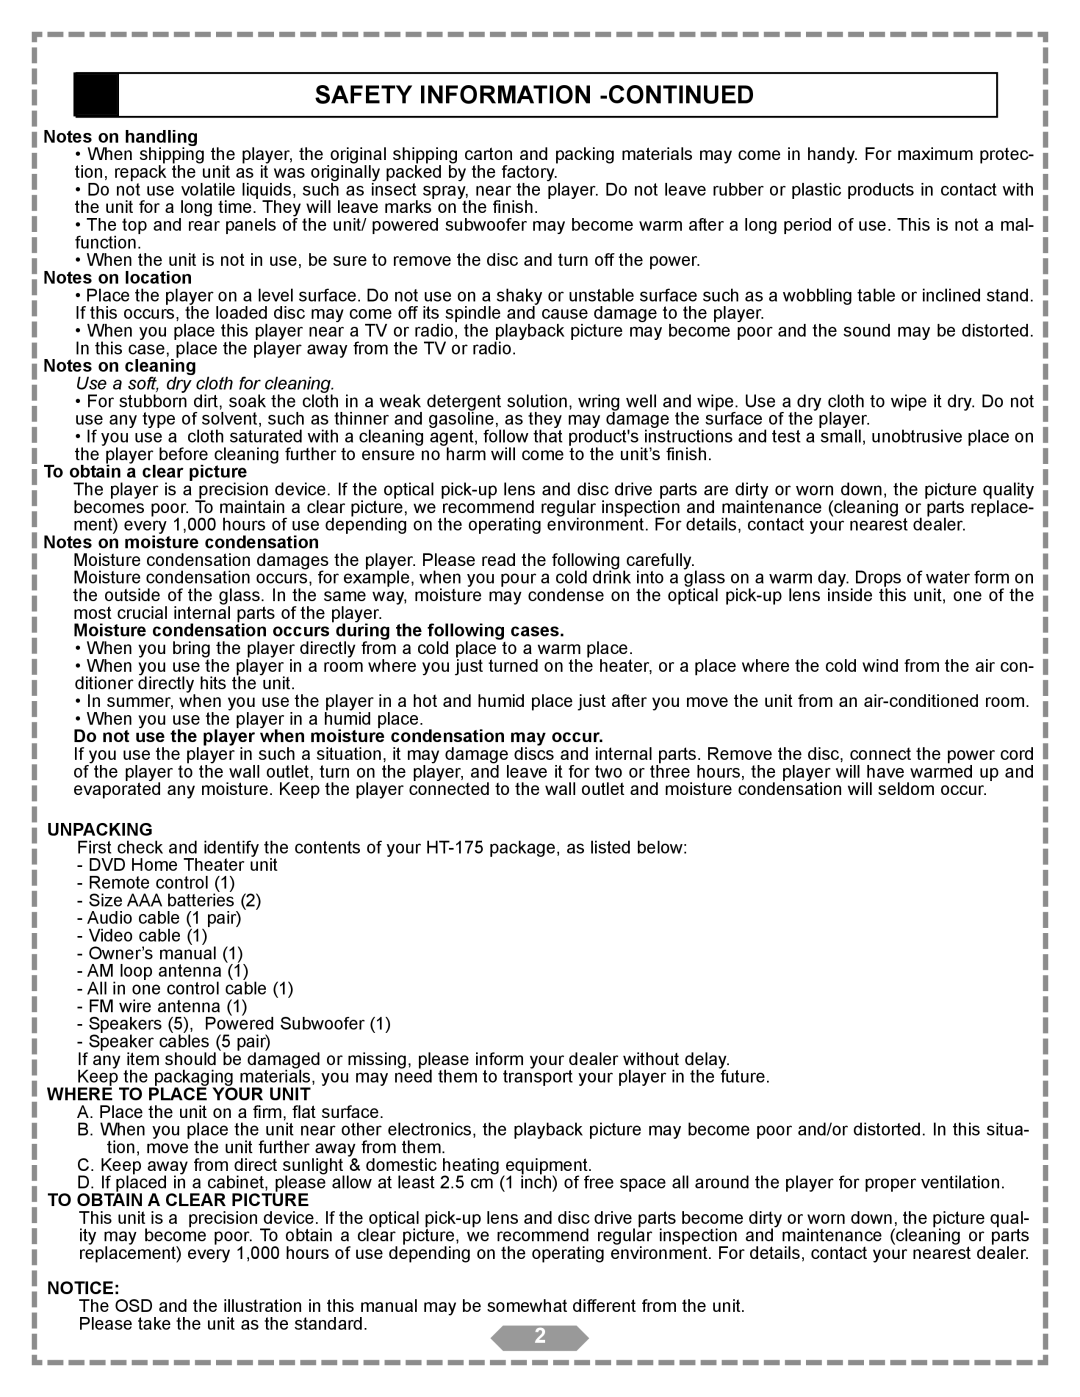 Apex Digital HT-175 manual Safety Information -Continued 